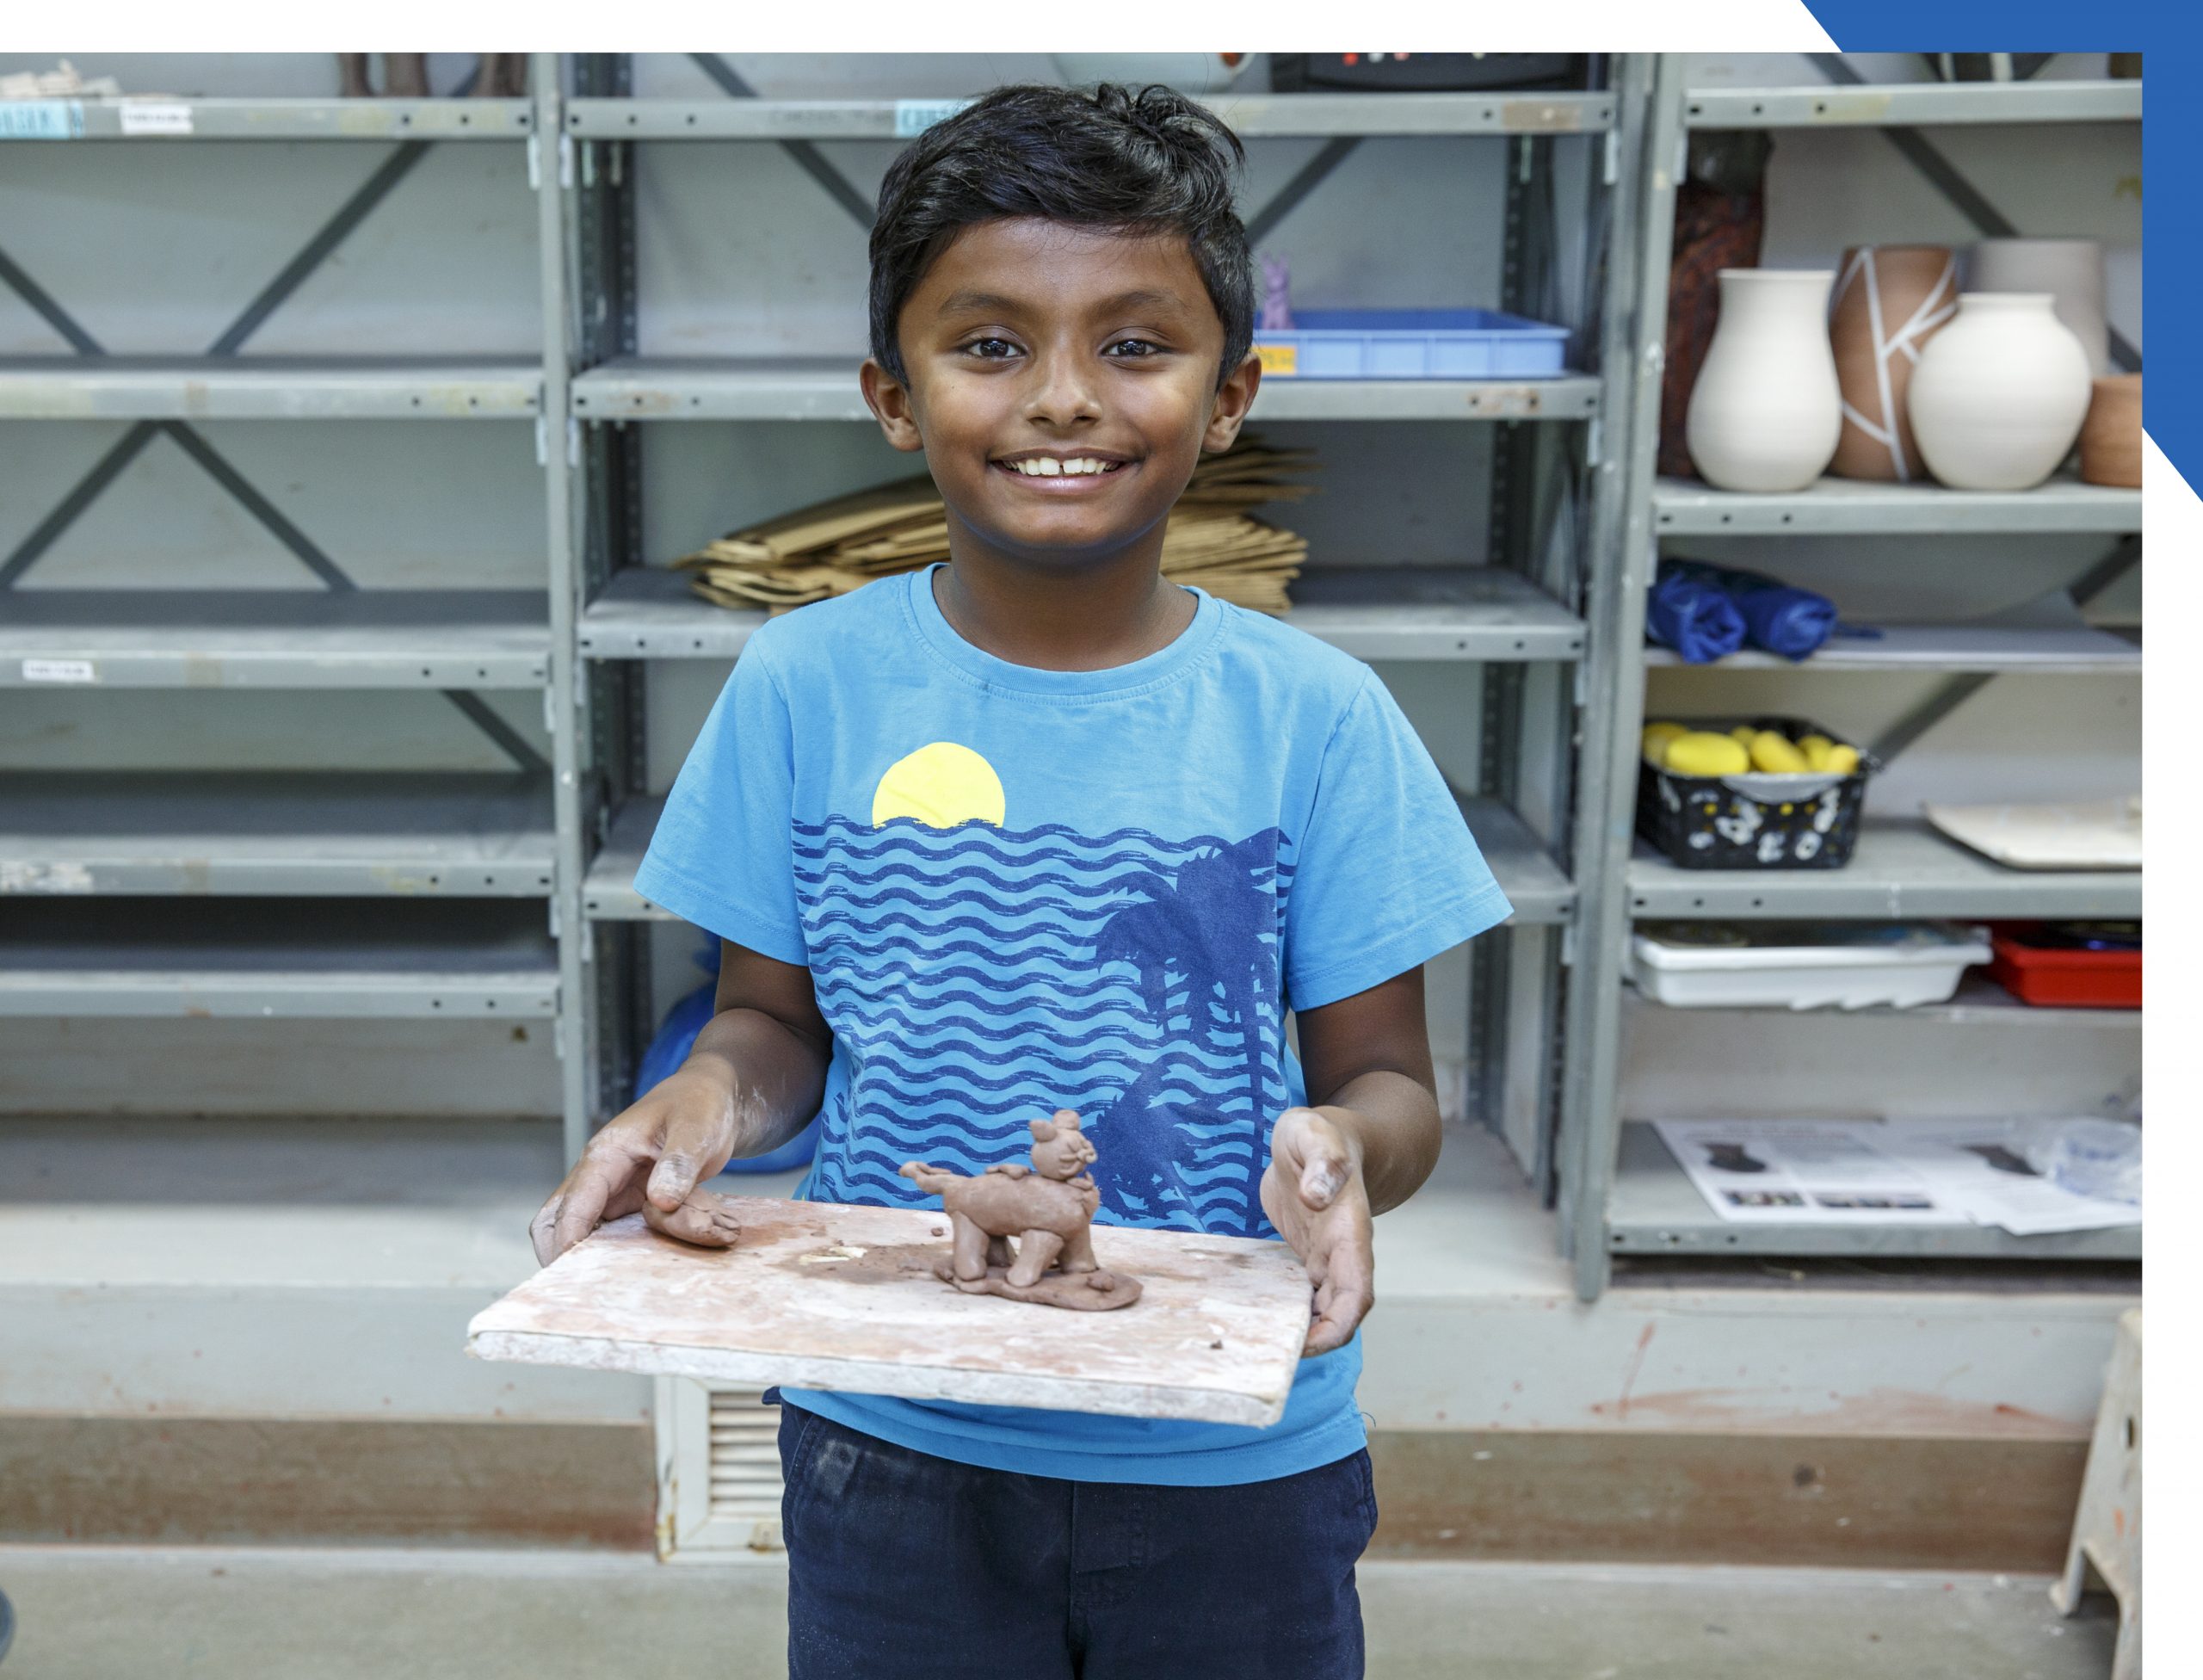 Smiling child showing his artwork